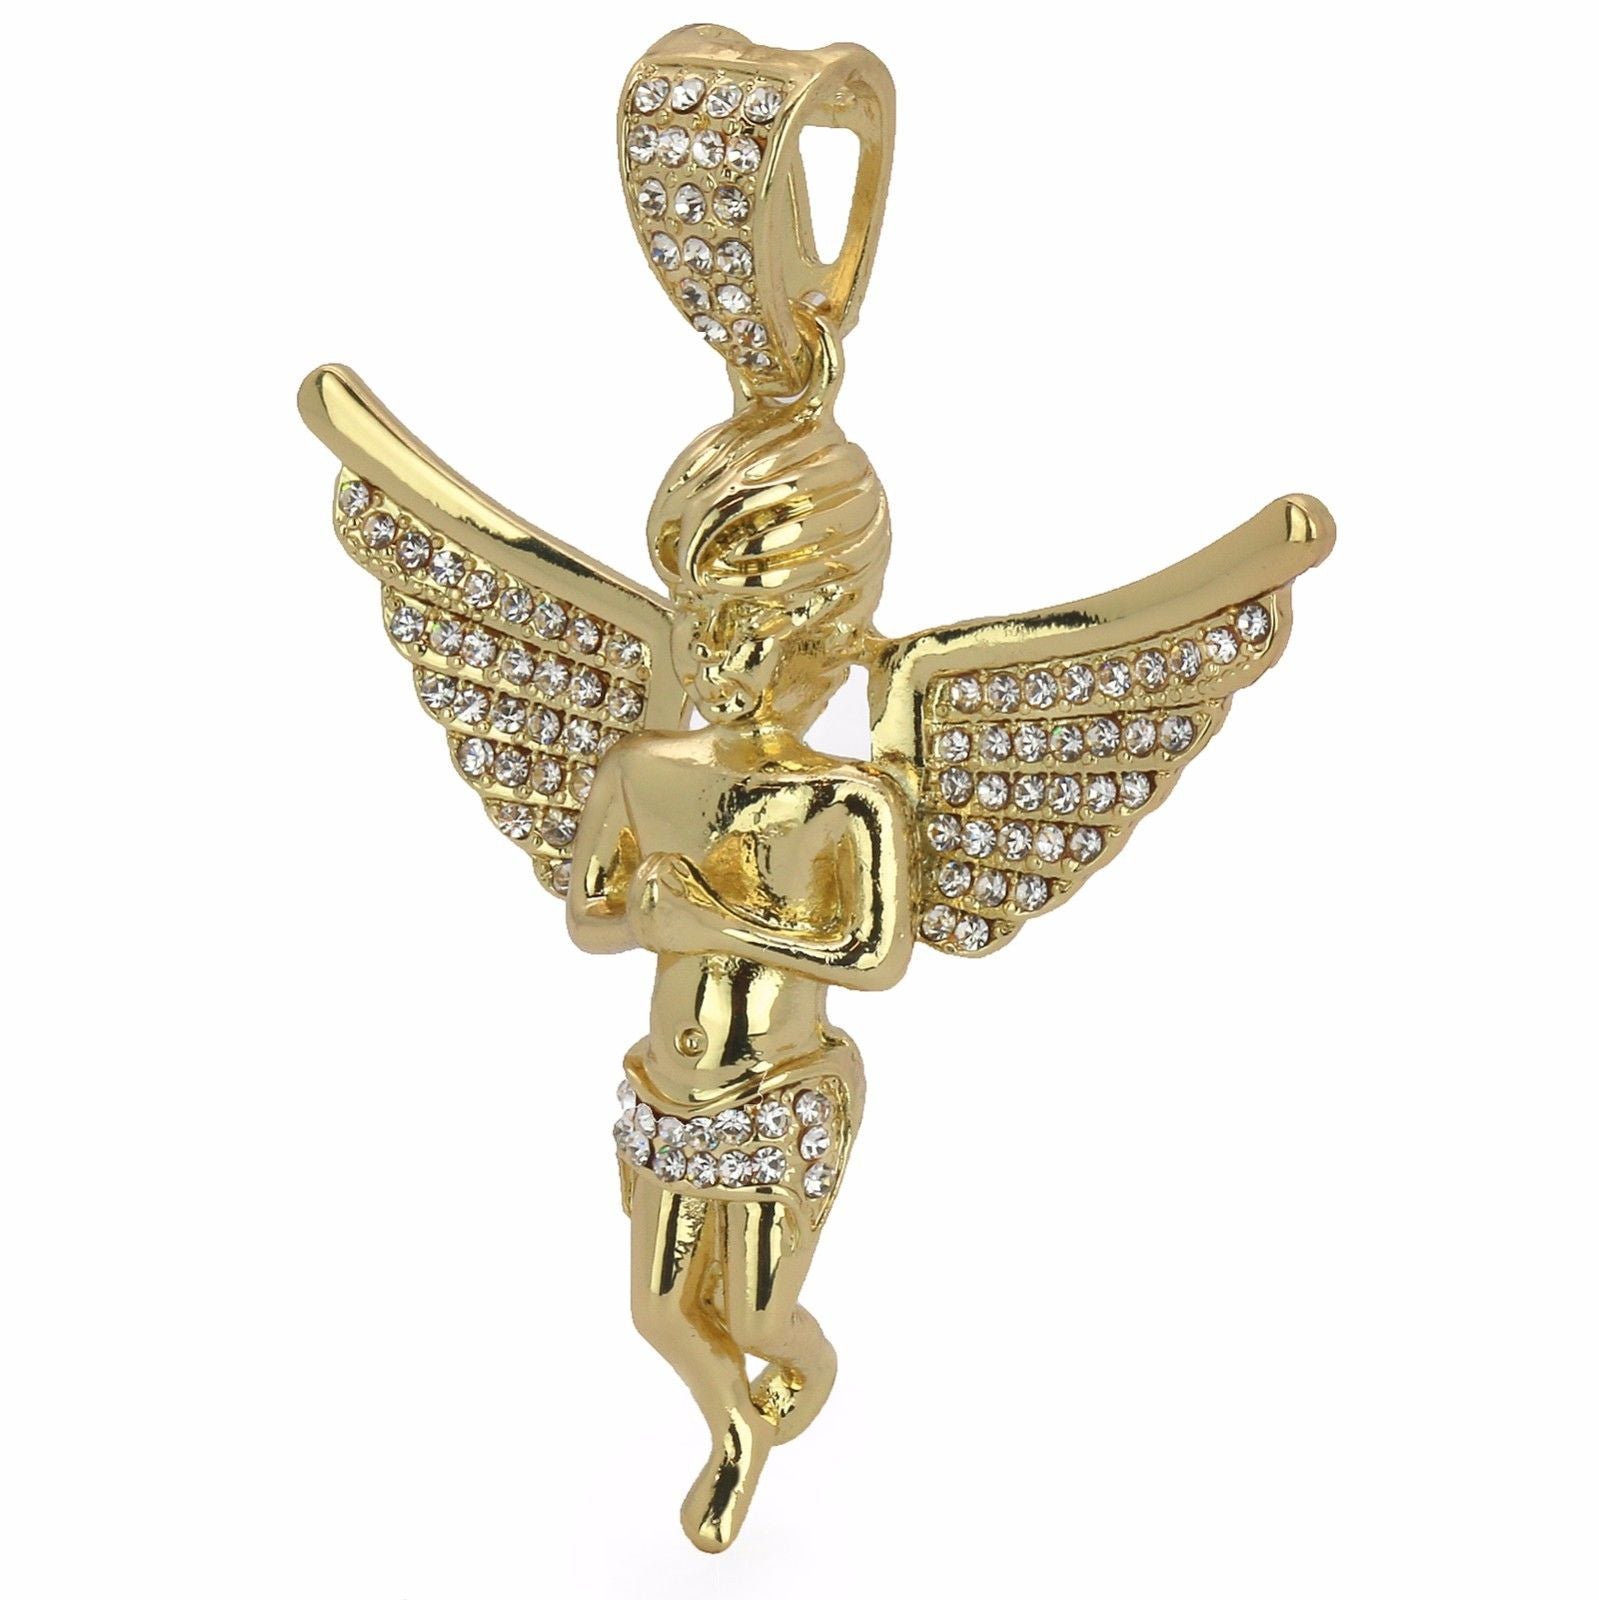 Gold Angel NECKLACE